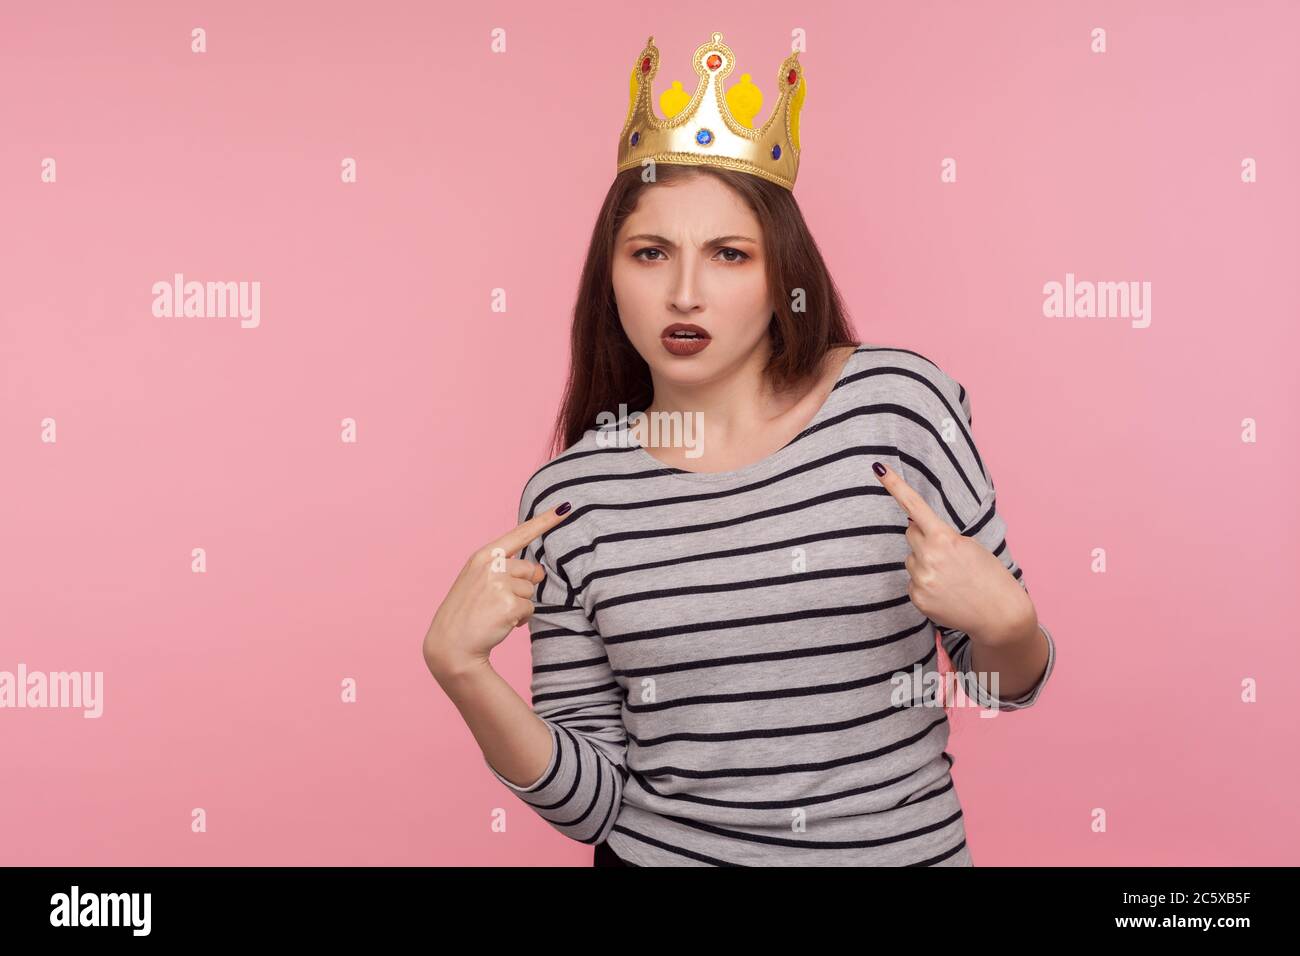 I'm boss! Portrait of selfish egoistic woman with golden crown on head pointing herself and looking with arrogance, declaring her authority, leadershi Stock Photo